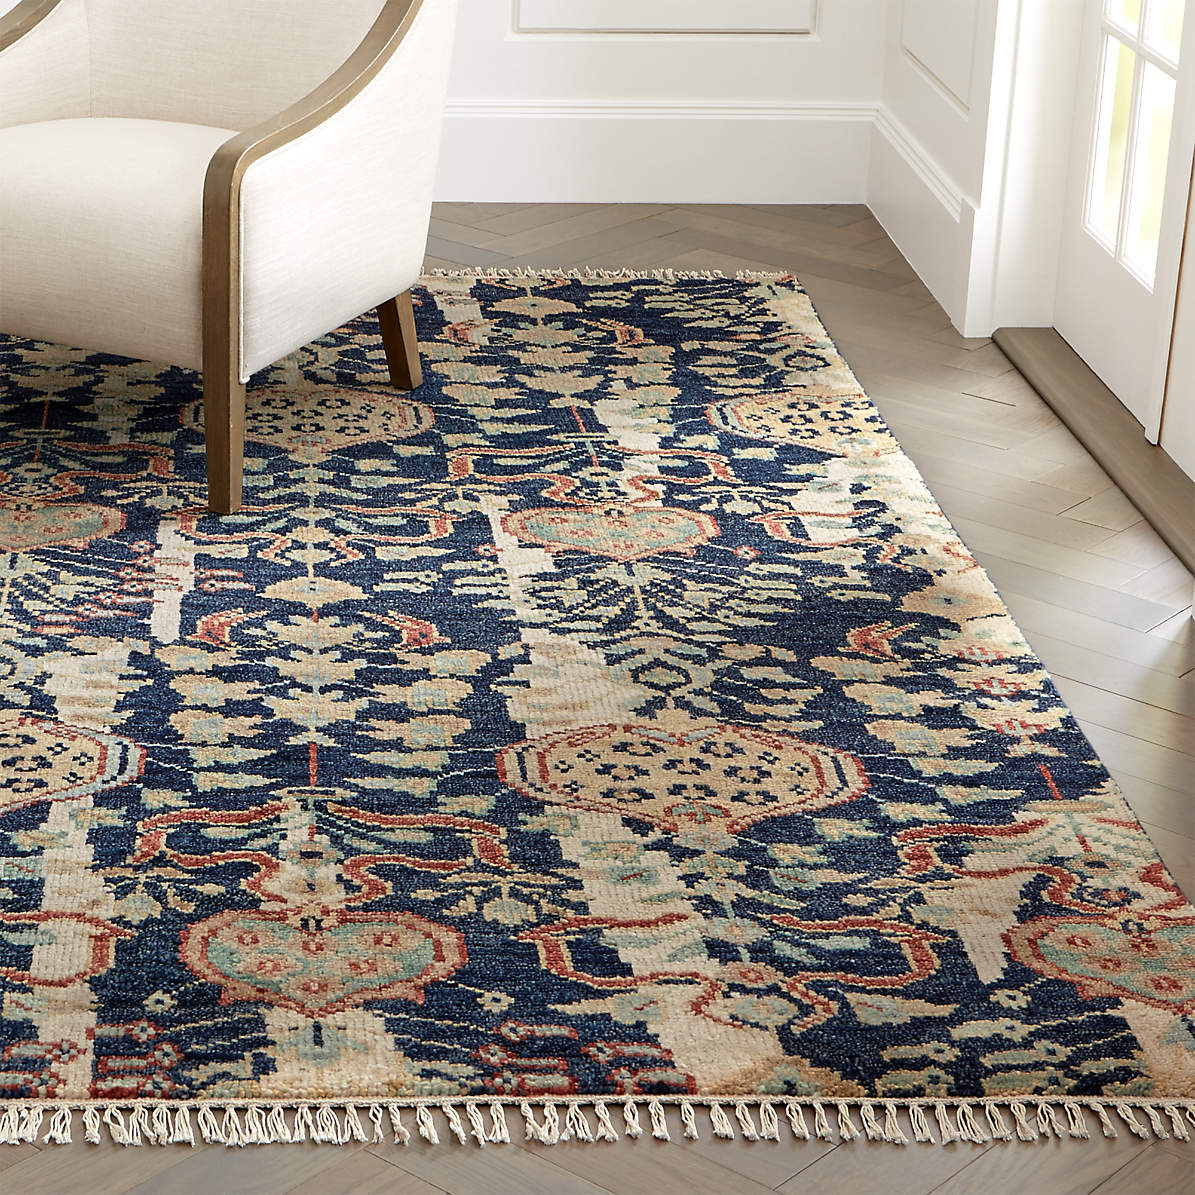 Devereux Oriental Rug Crate And Barrel, Crate And Barrel Area Rugs